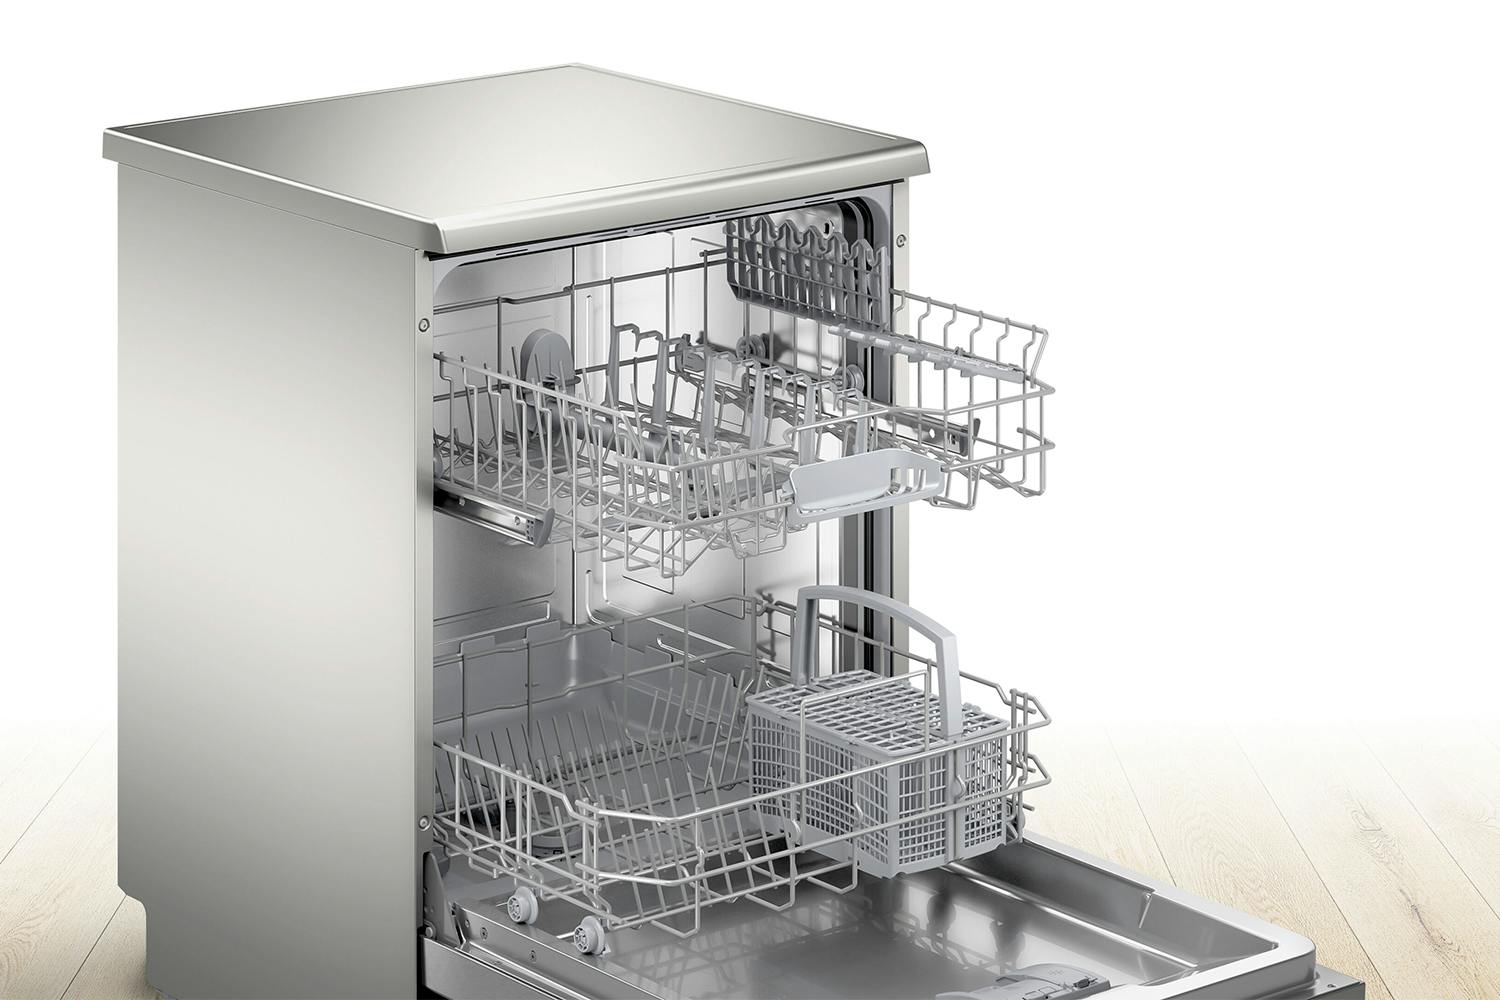 Bosch 13 Place Setting Serie 2 Freestanding Dishwasher - Stainless Steel